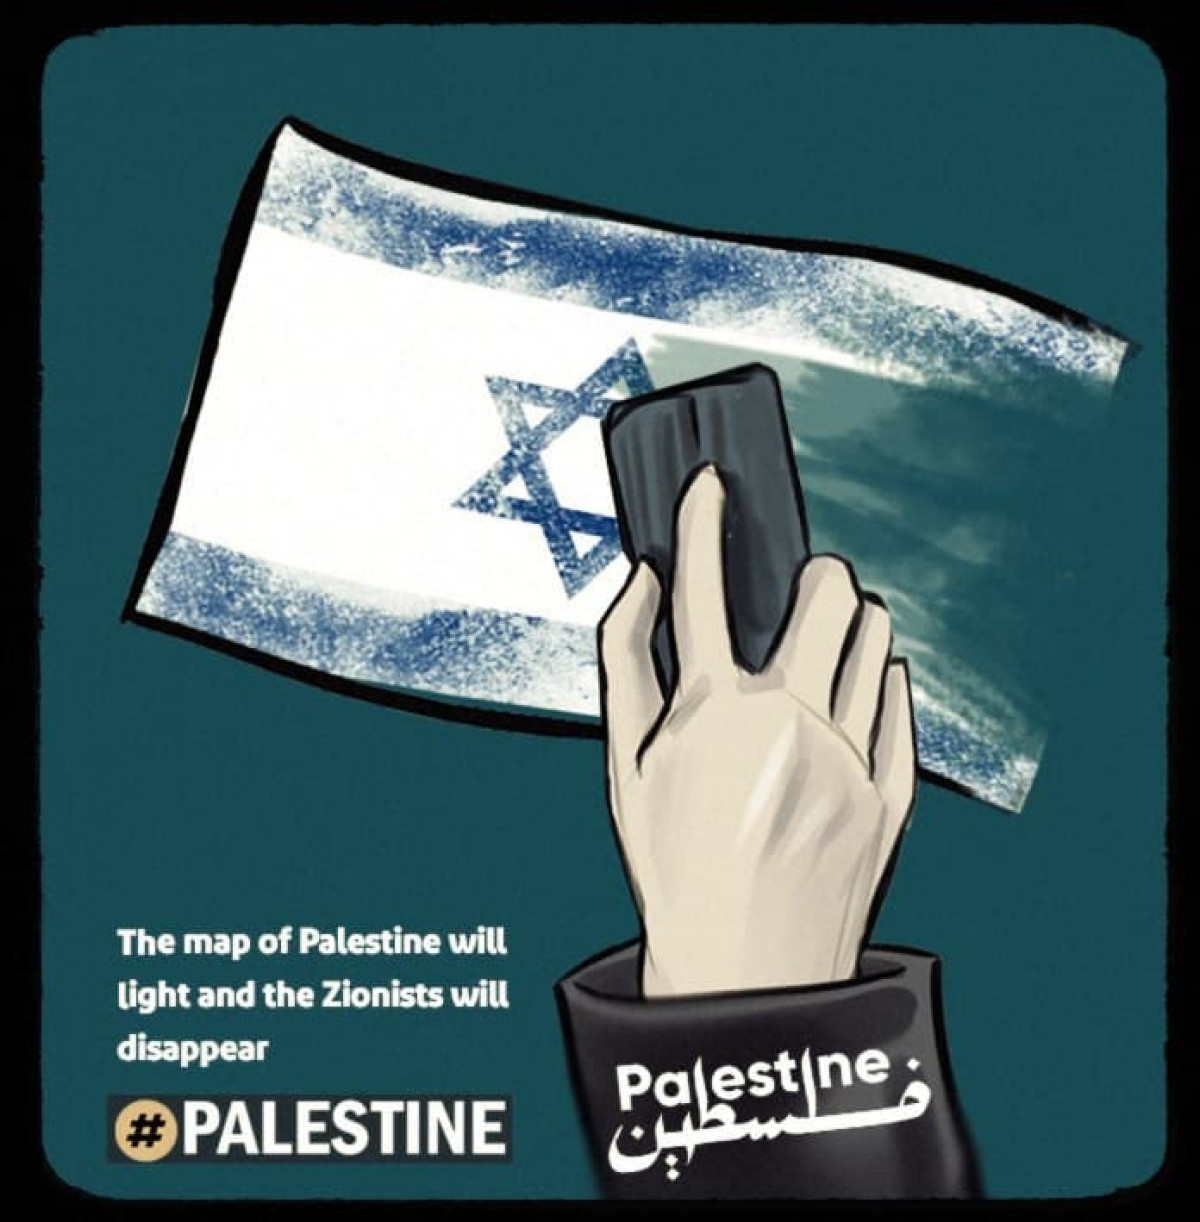 The map of Palestine will light